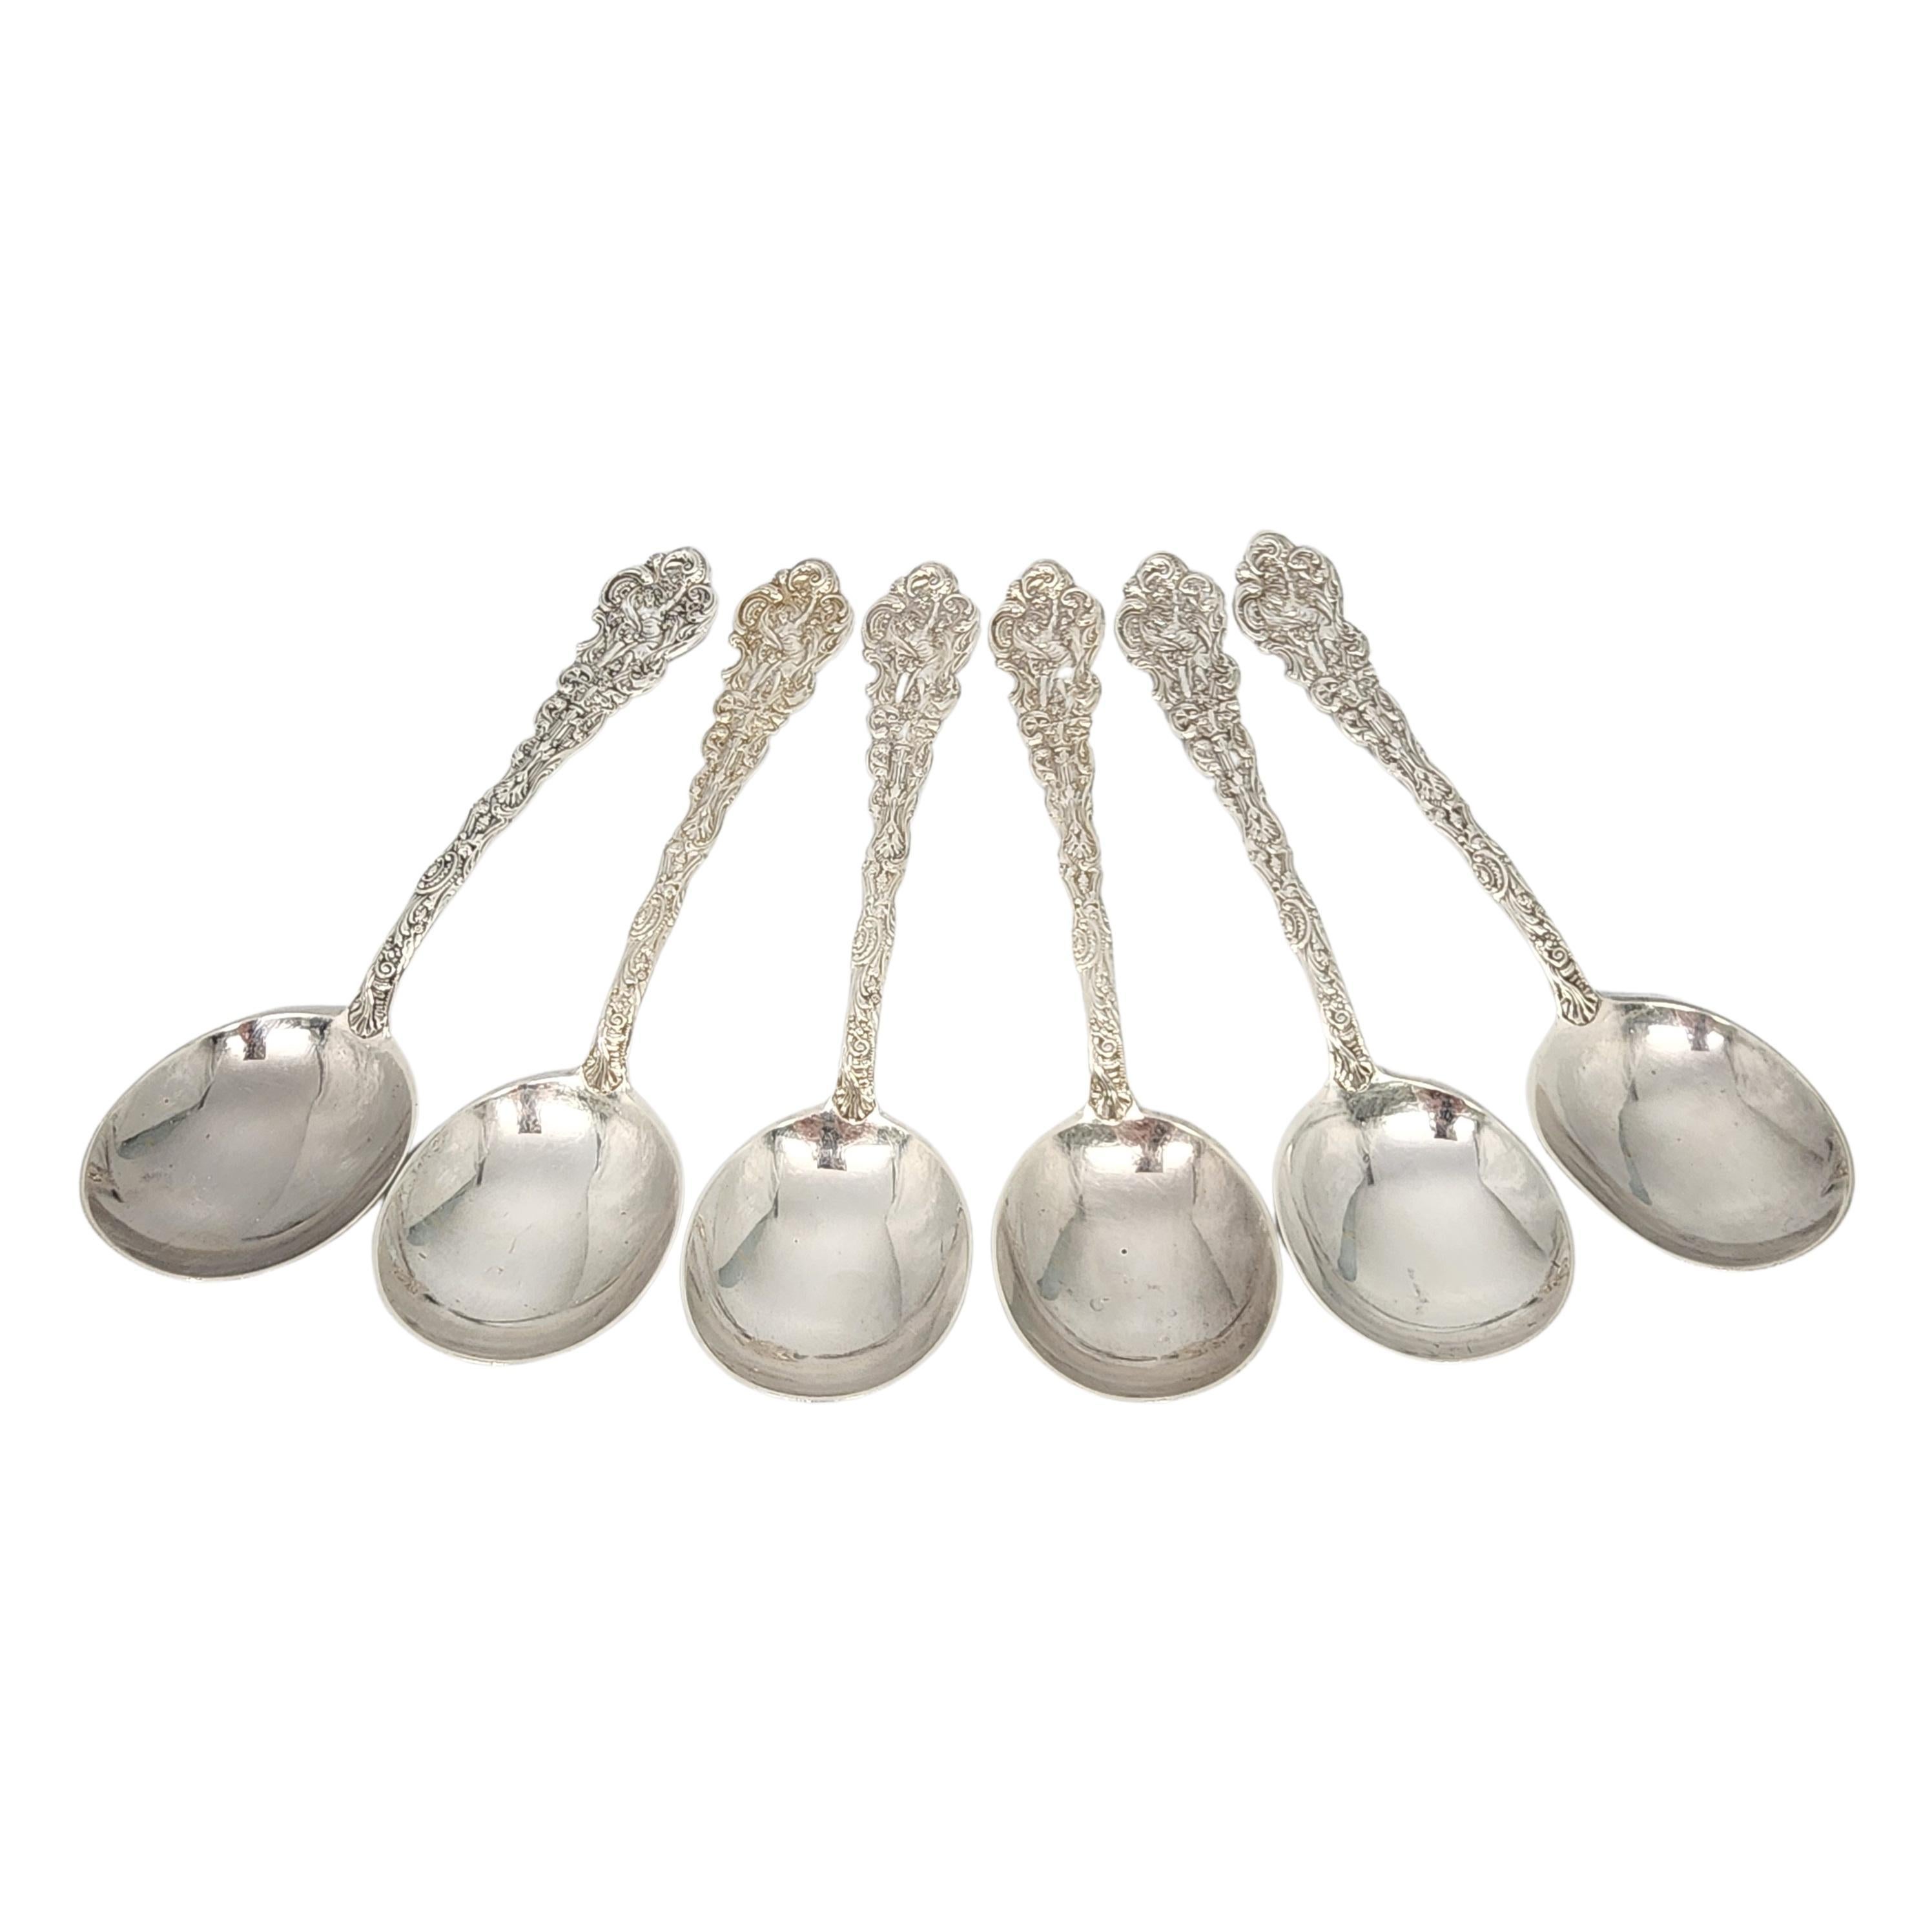 6 Gorham Versailles Sterling Silver Round Bowl Gumbo Spoons 6 5/8" w/Mono #17140 For Sale